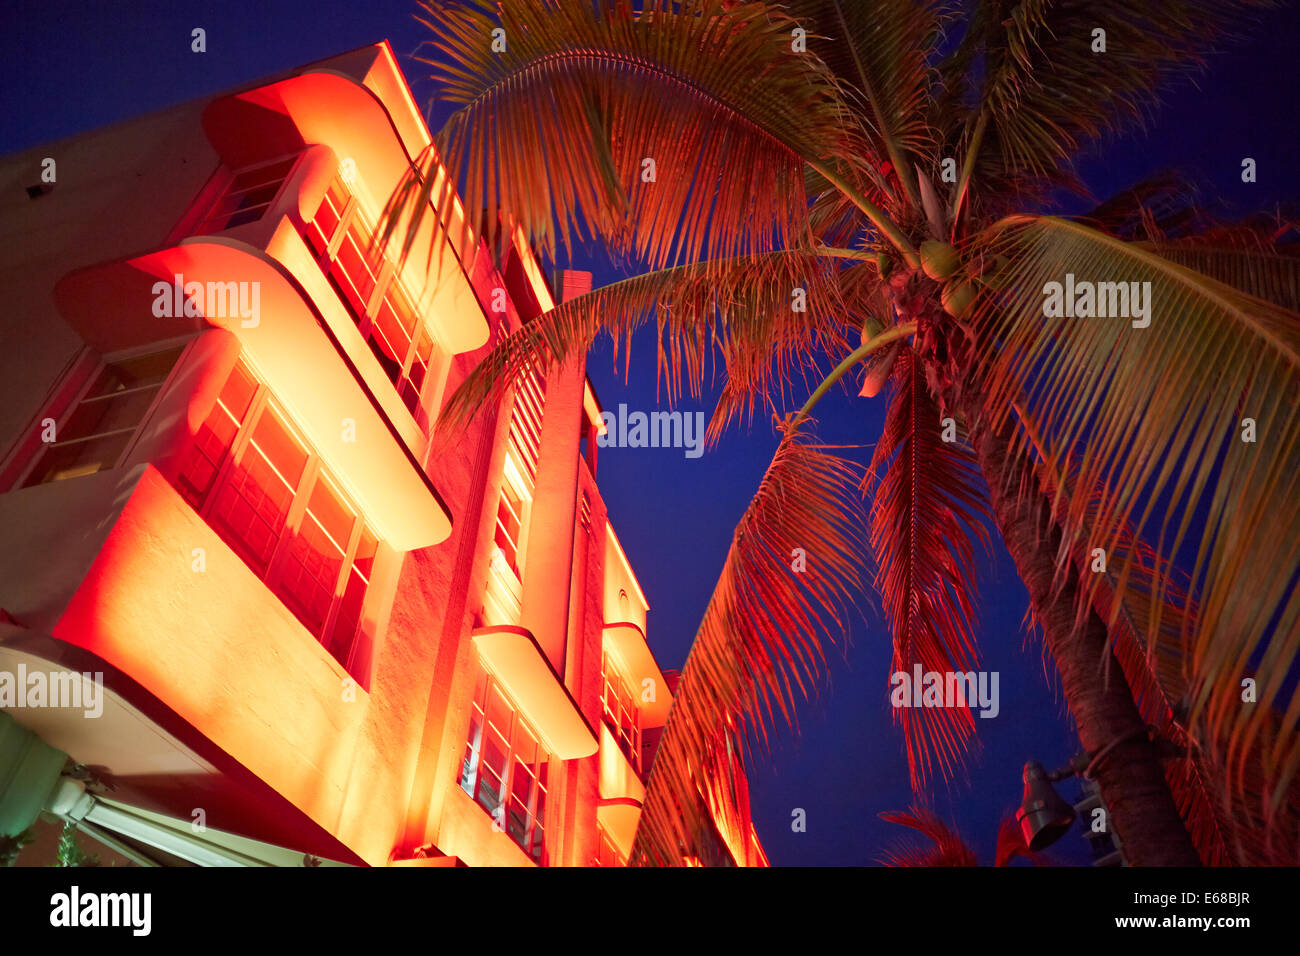 Art deco hotels and restaurants glow in the evening light on Ocean Drive in Miami, Florida USA Stock Photo